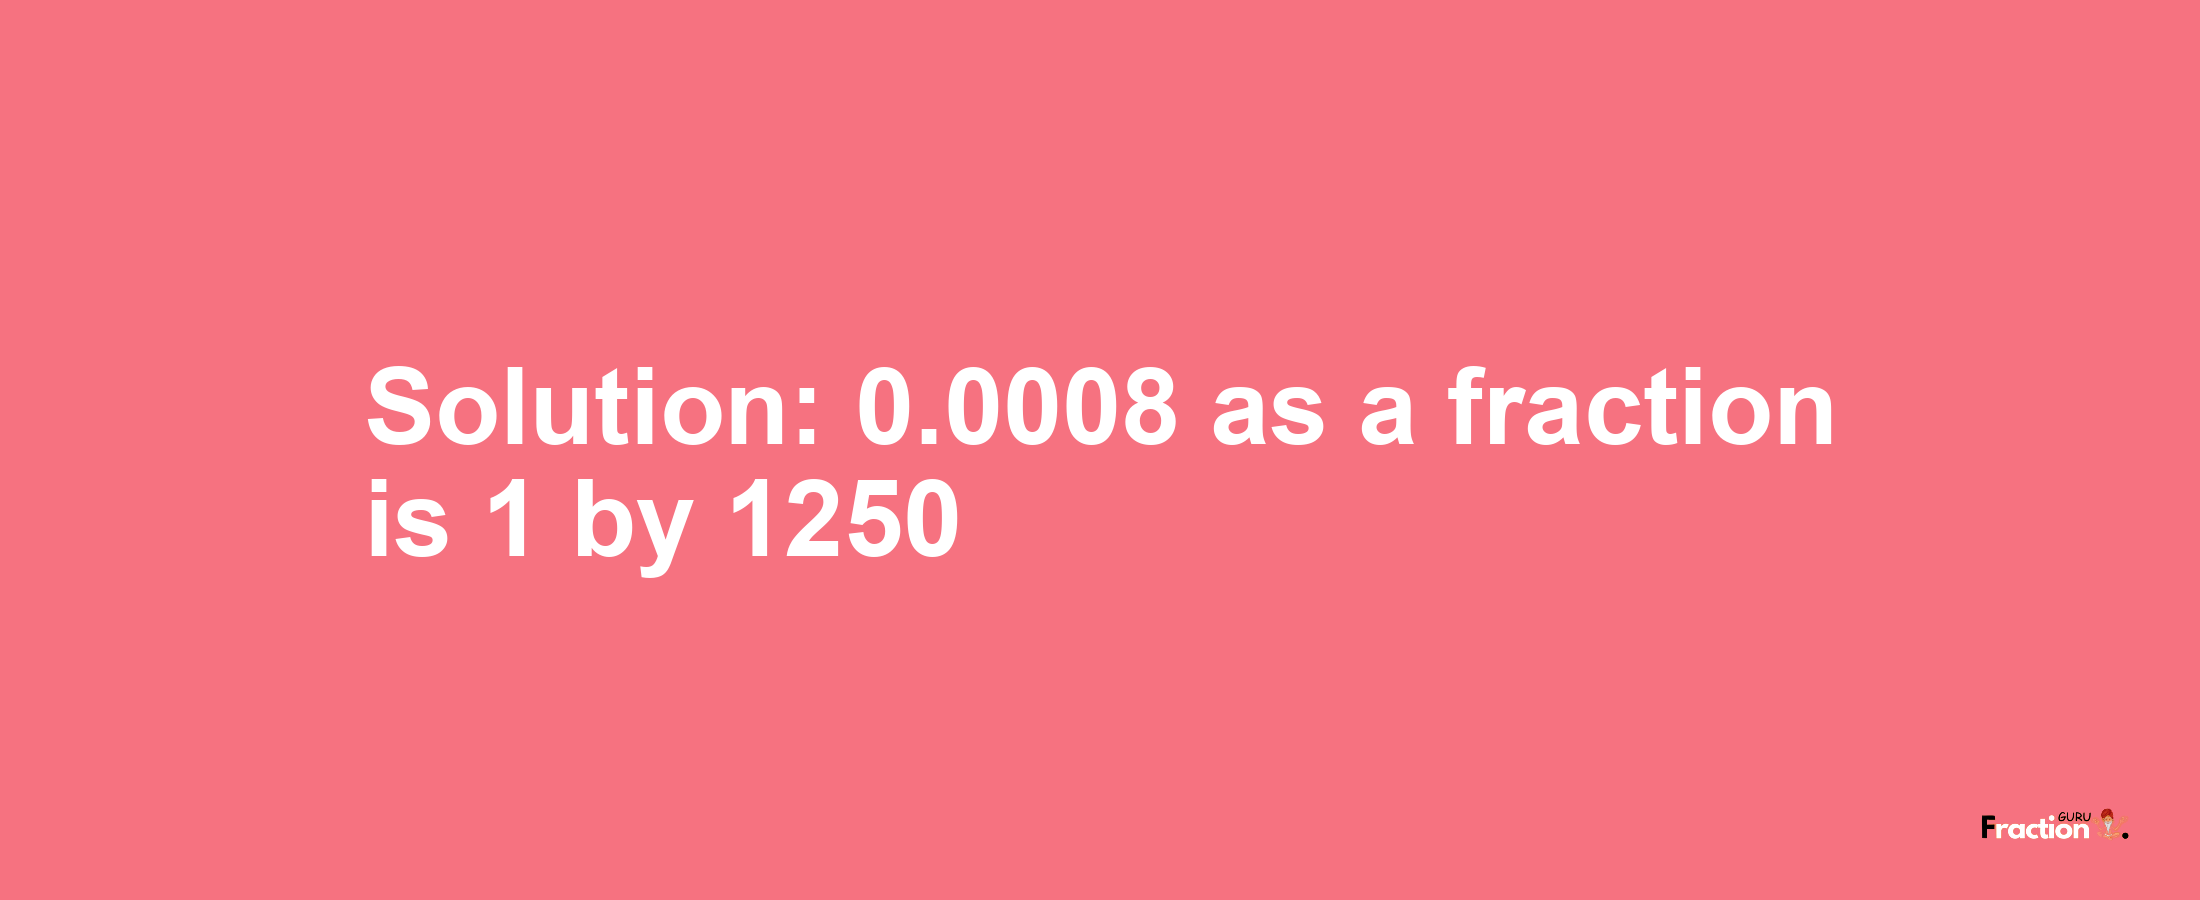 Solution:0.0008 as a fraction is 1/1250